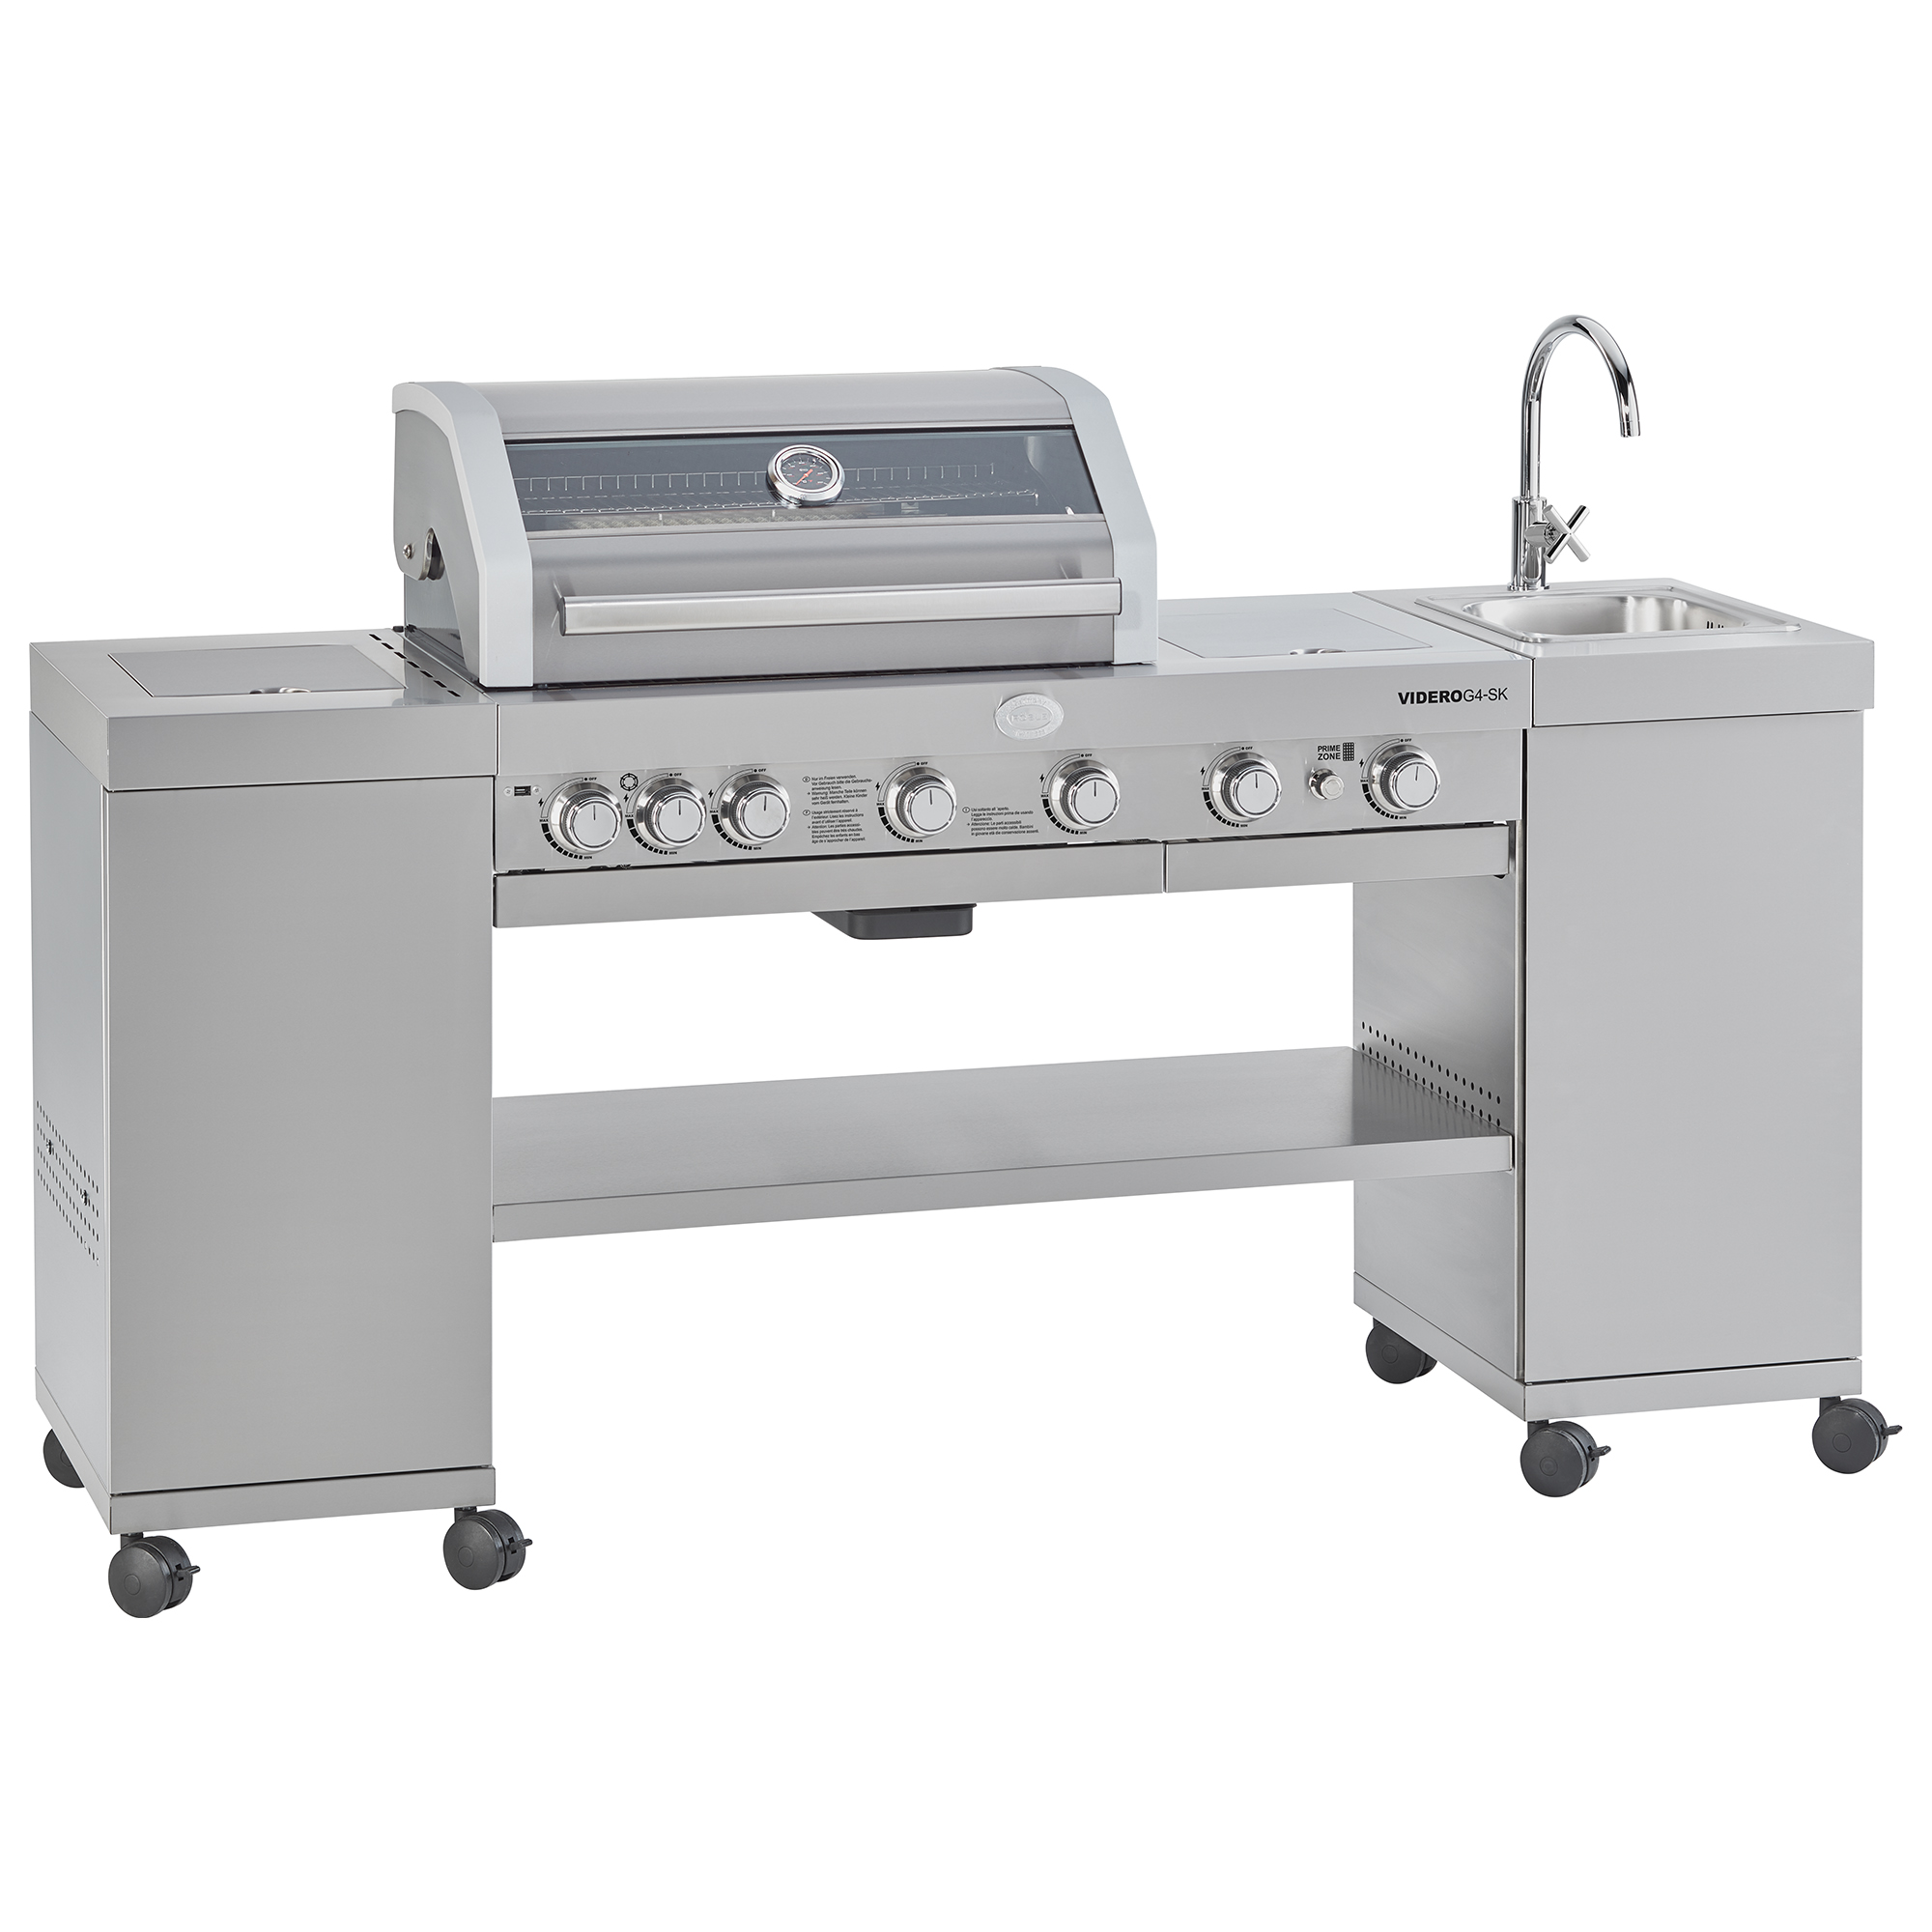 Gas grill BBQ-Kitchen VIDERO G4-SK Vario+ Stainless steel 50 mbar (Model year 2021